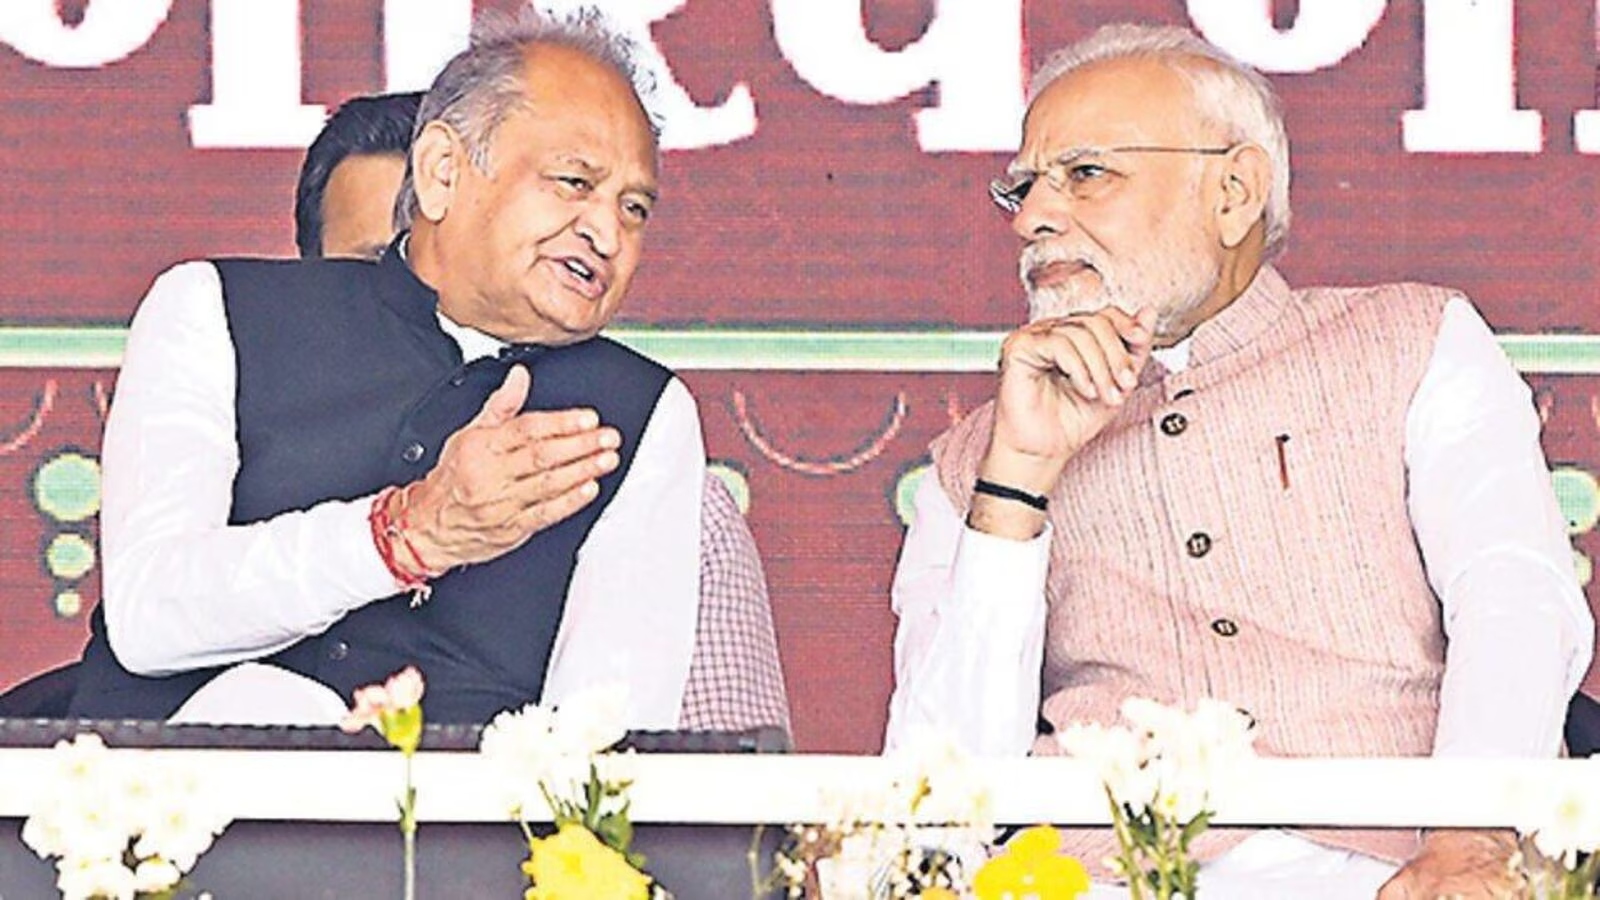 PM condemns Gehlot: "Red dairy will expose secrets" - Asiana Times